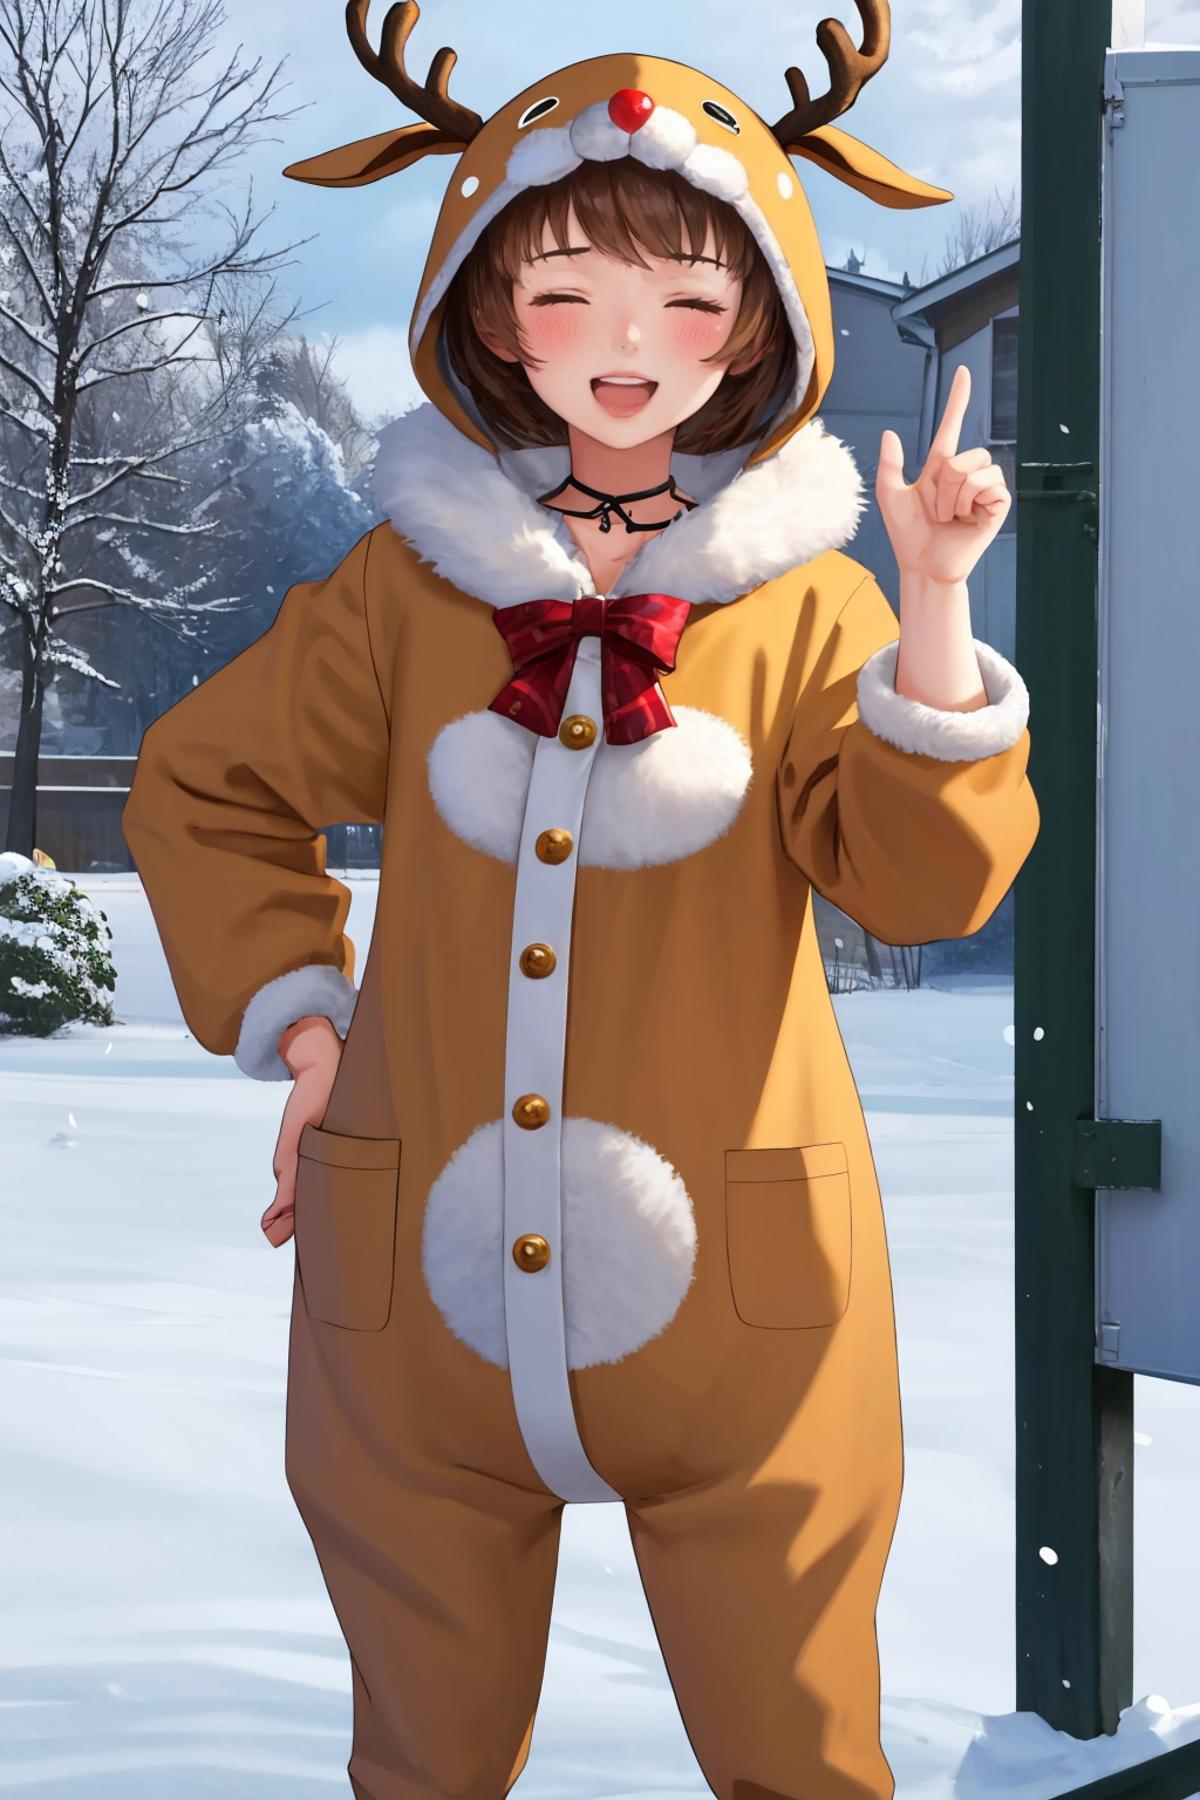 Reindeer Costume Outfit (Christmas/Holidays) LoRA image by richyrich515